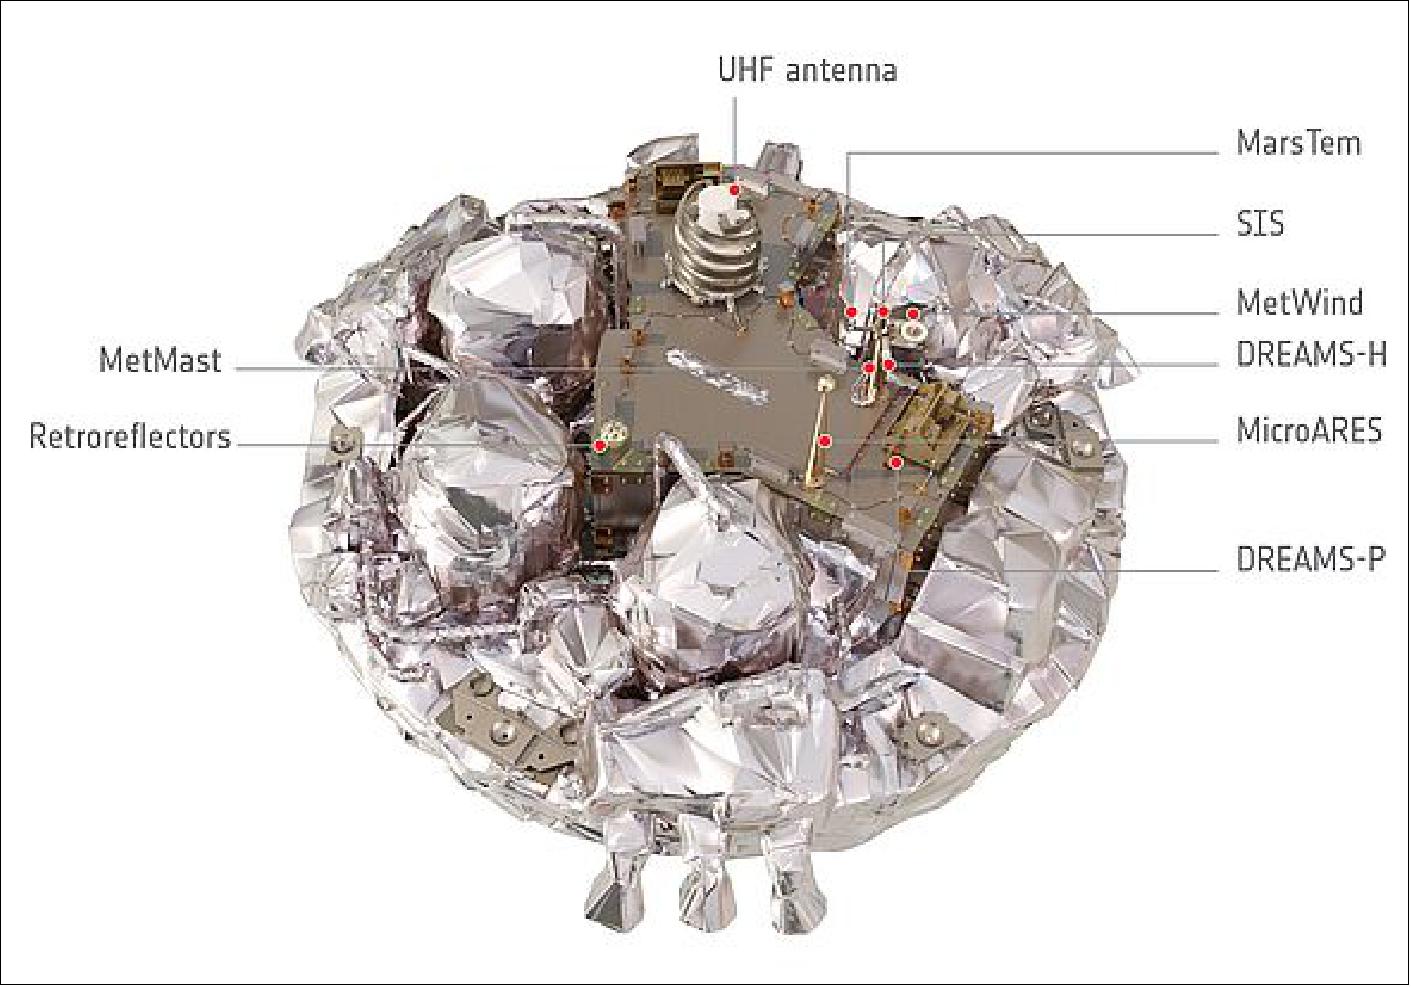 Figure 142: Artist's rendition of the Schiaparelli EDM without heat shield and back cover (image credit: ESA, ATG medialab) 139)